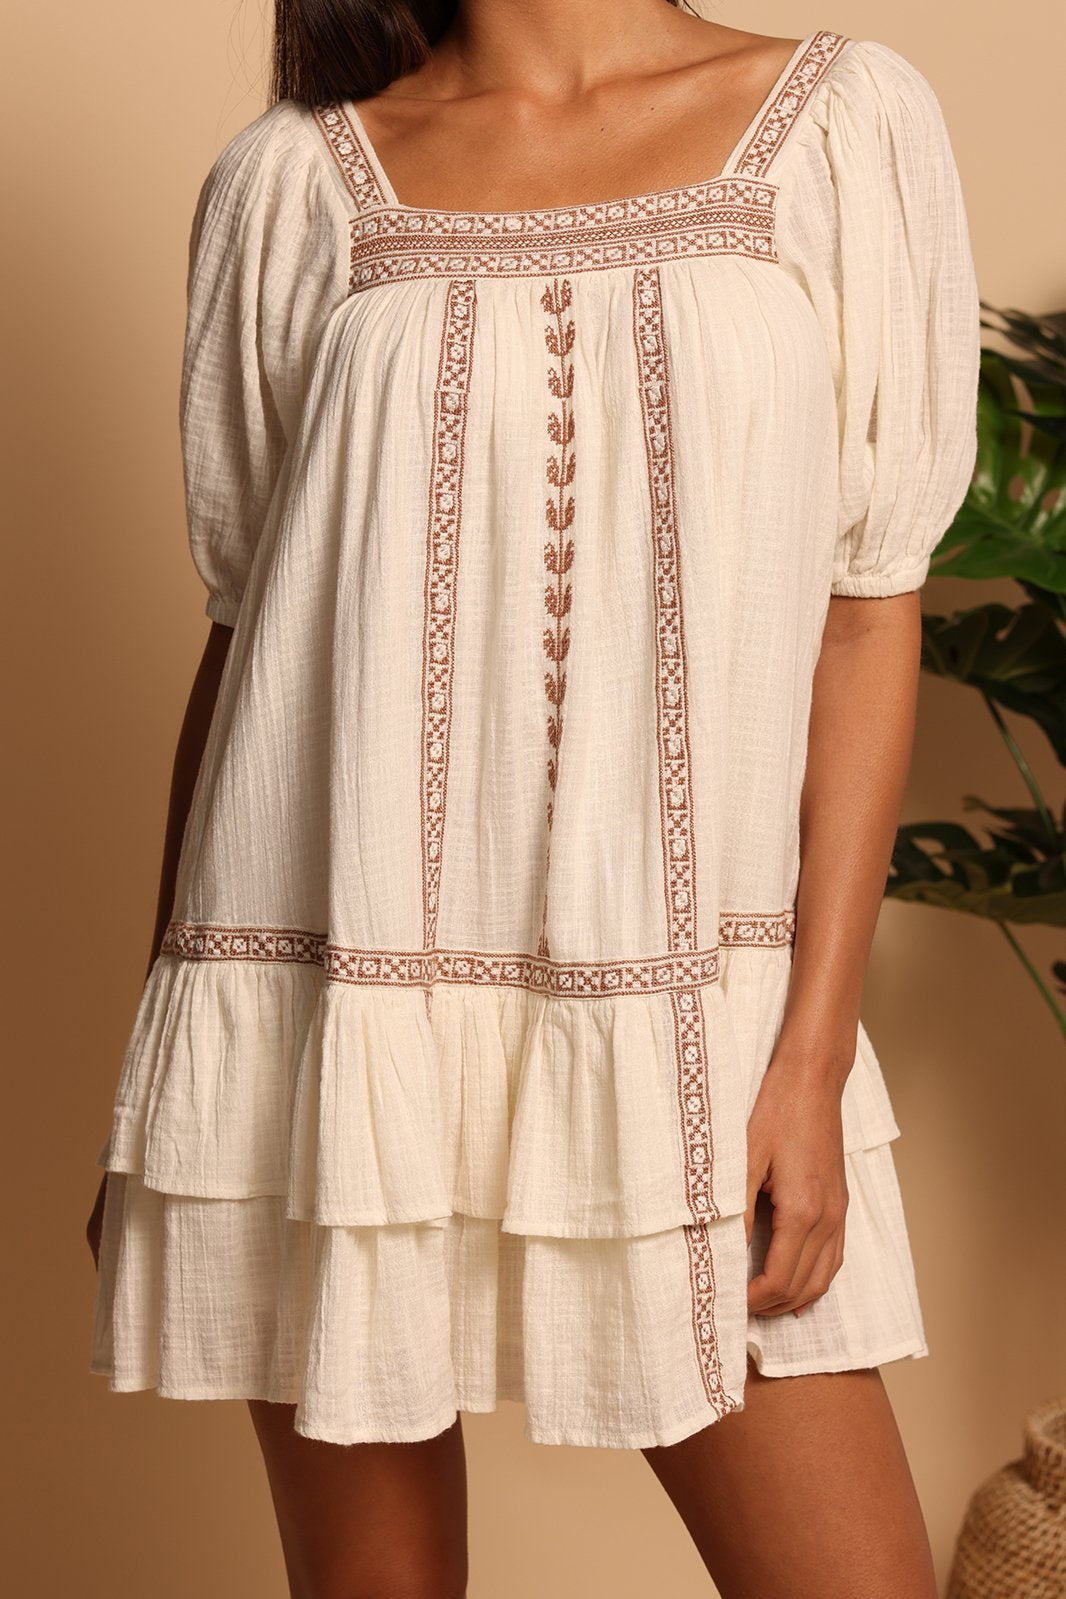 SQUARE NECK BABYDOLL DRESS - SAND EMBROIDERY - XS